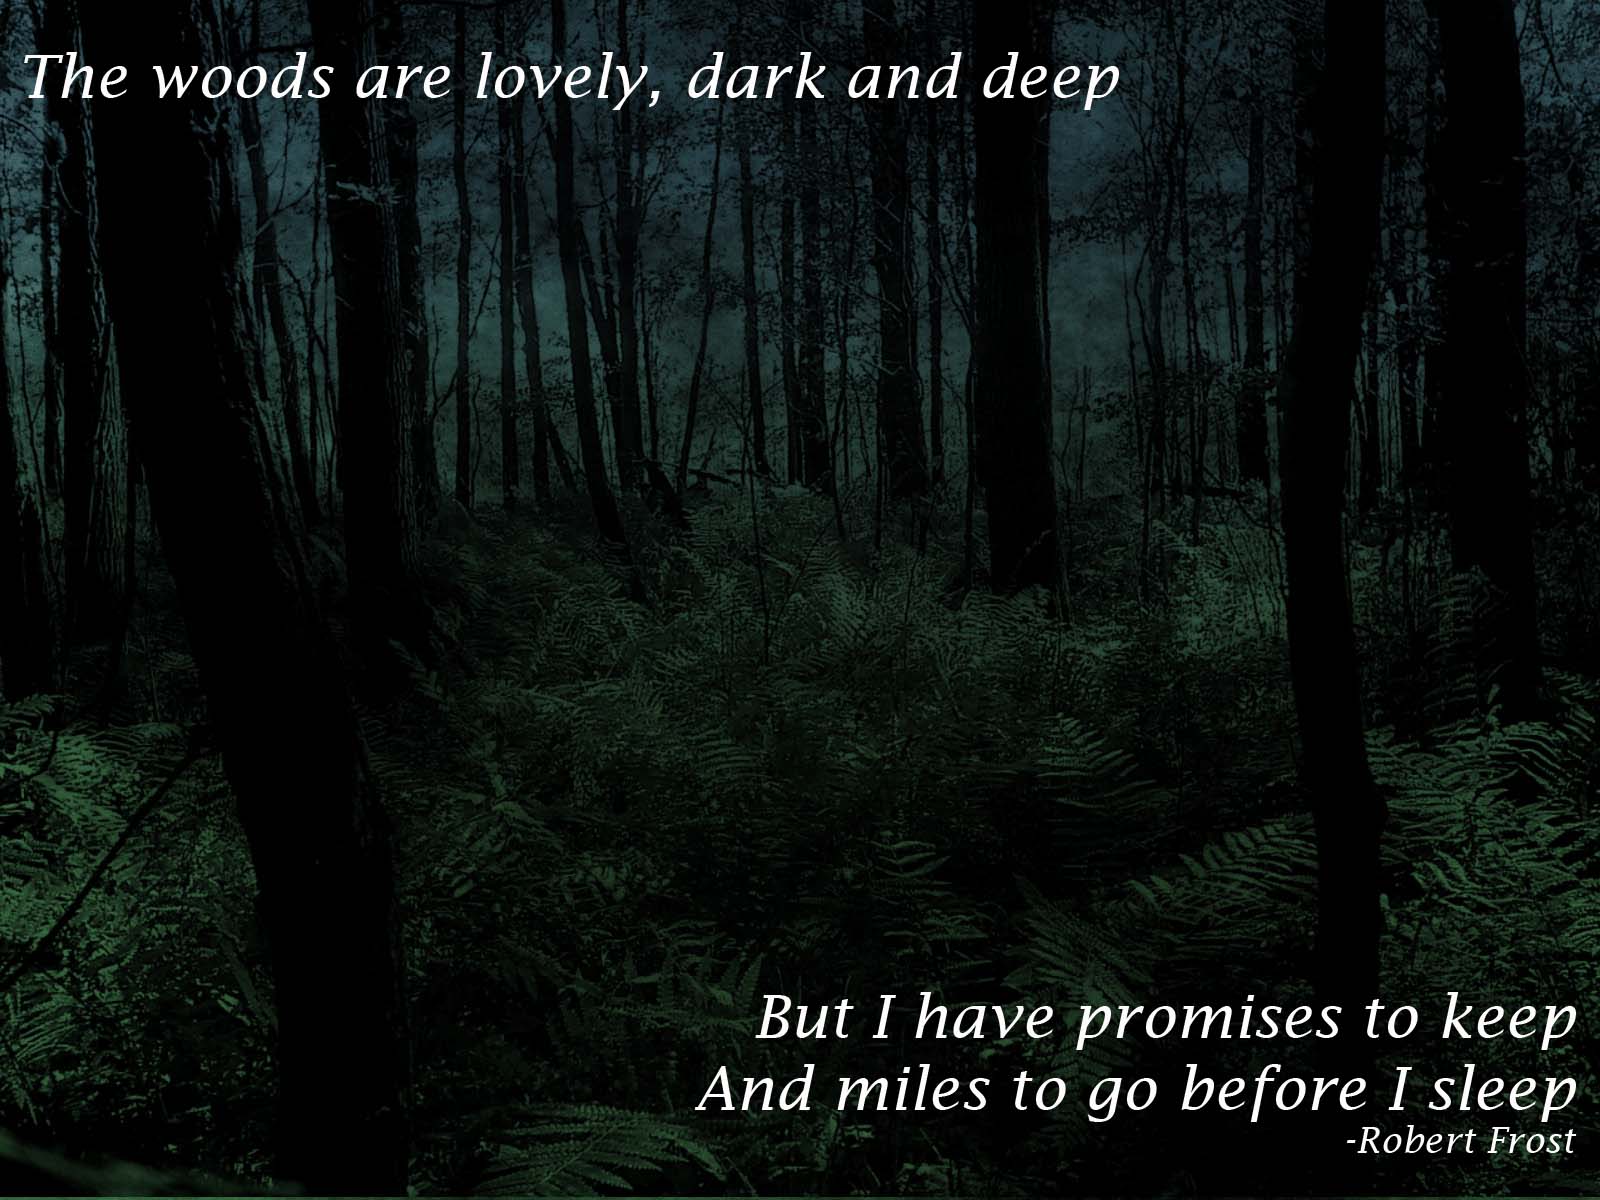 The woods are lovely, dark and deep. But I have promises to keep, and miles to go before I sleep. Robert Frost